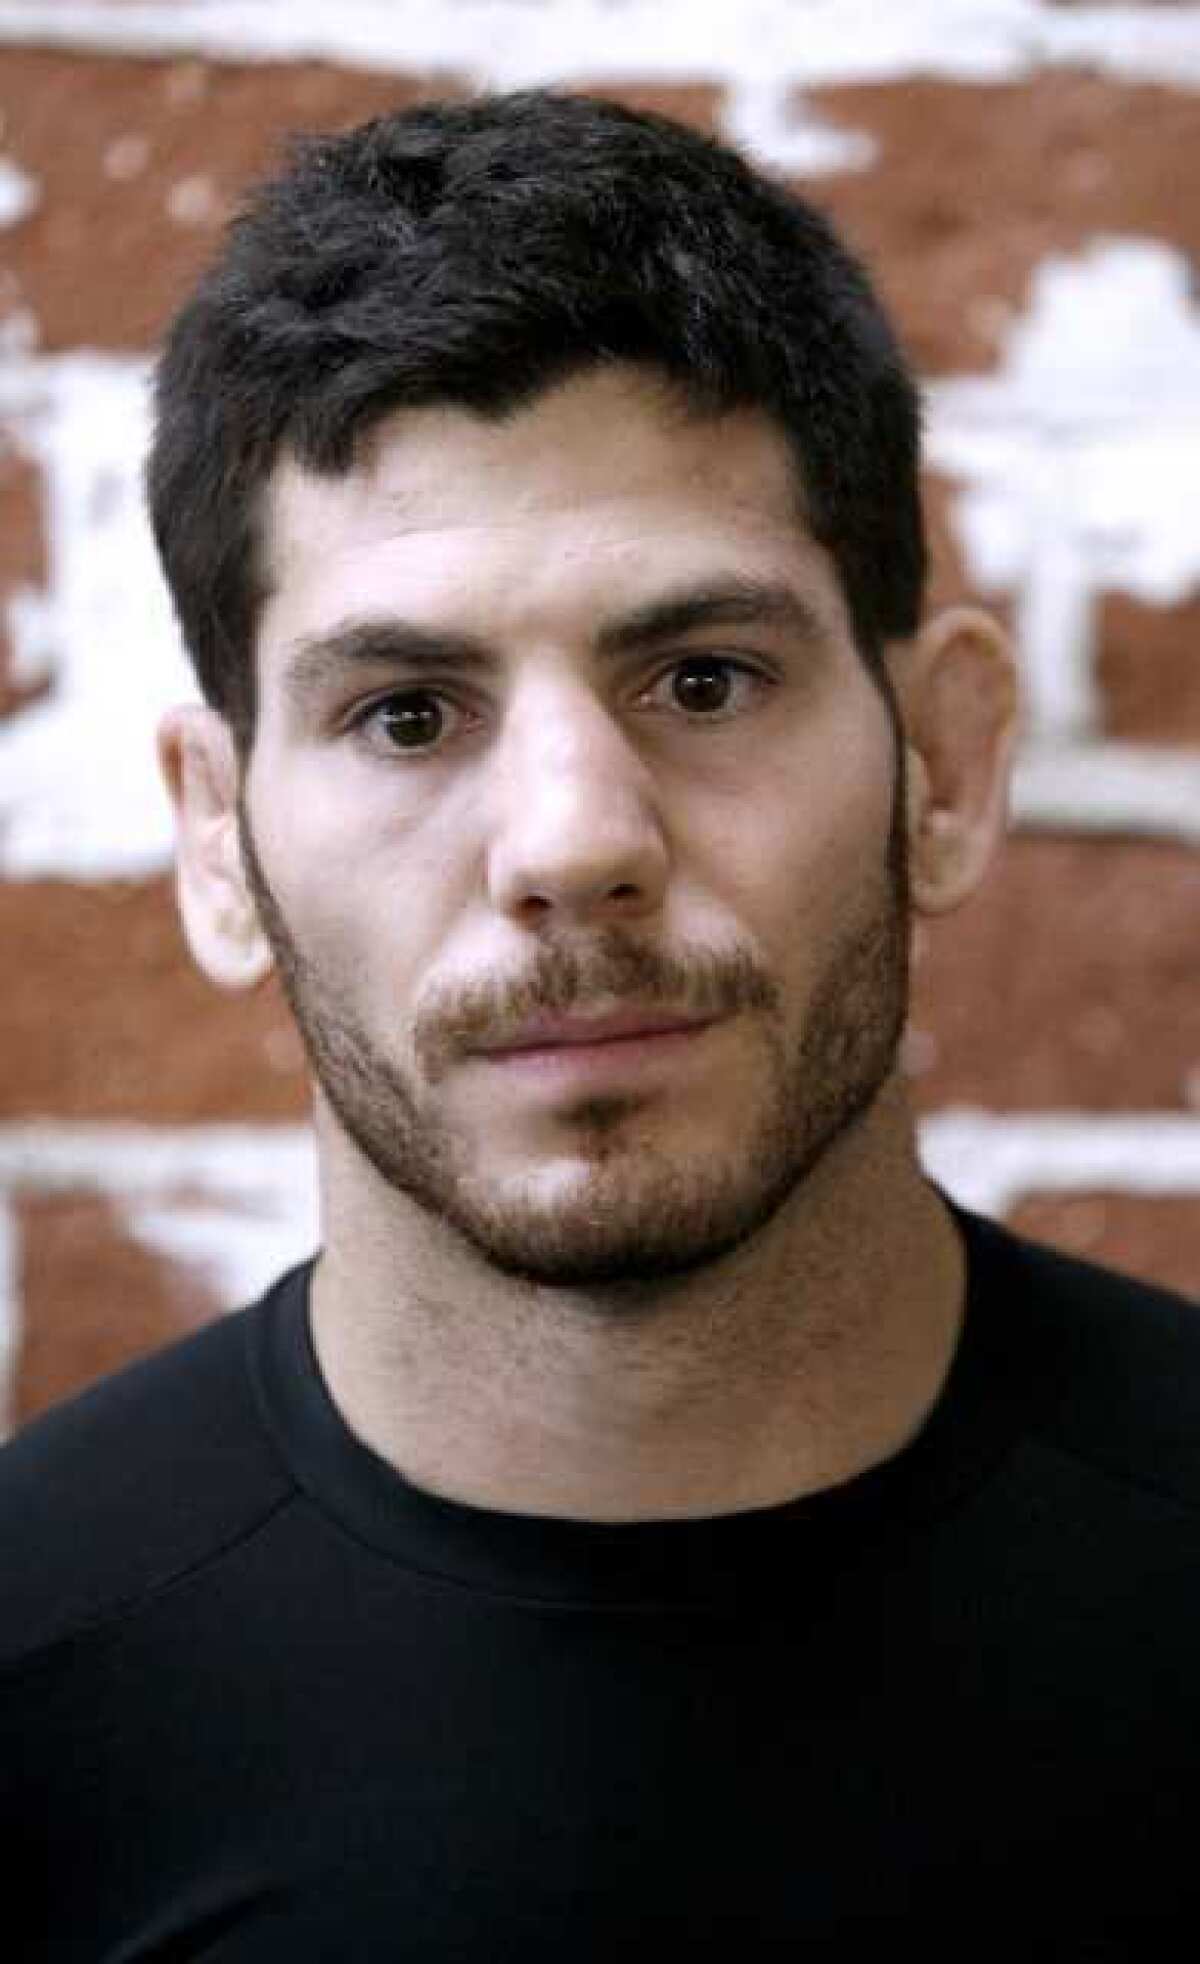 Mixed Martial arts fighter Jared Papazian, 24, at Gracie Barra Gym in Burbank on Thursday, May 31, 2012. Papazian will fight in Florida June 8.